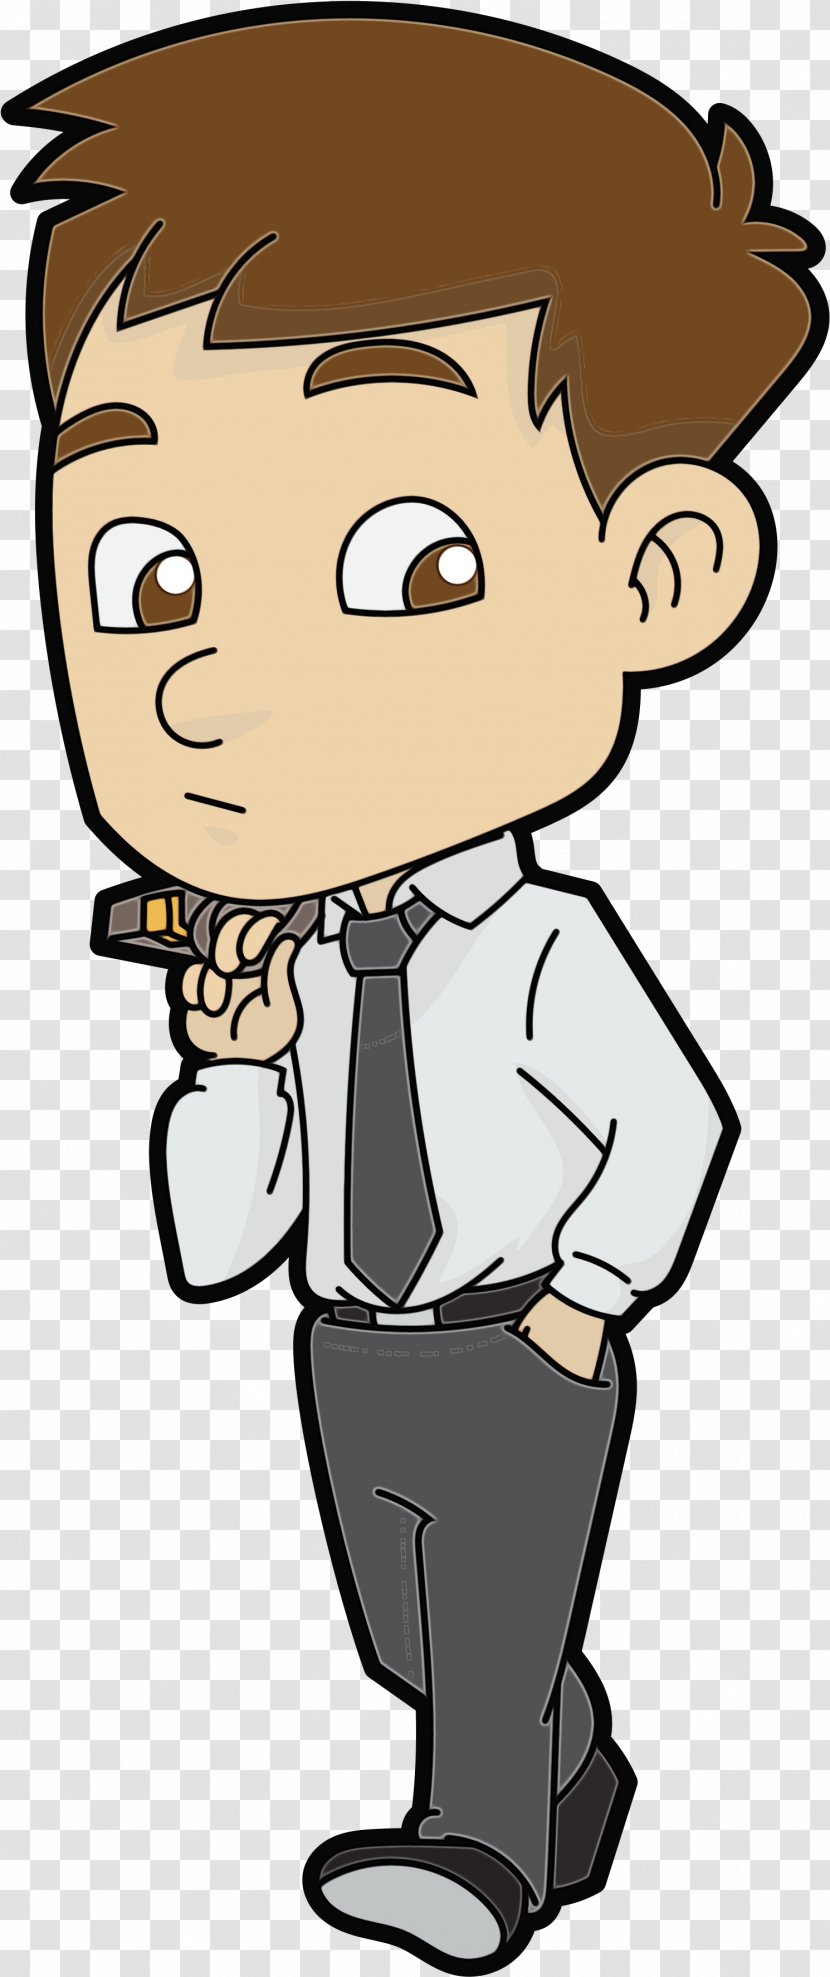 Person Cartoon - Gesture - Pleased Transparent PNG